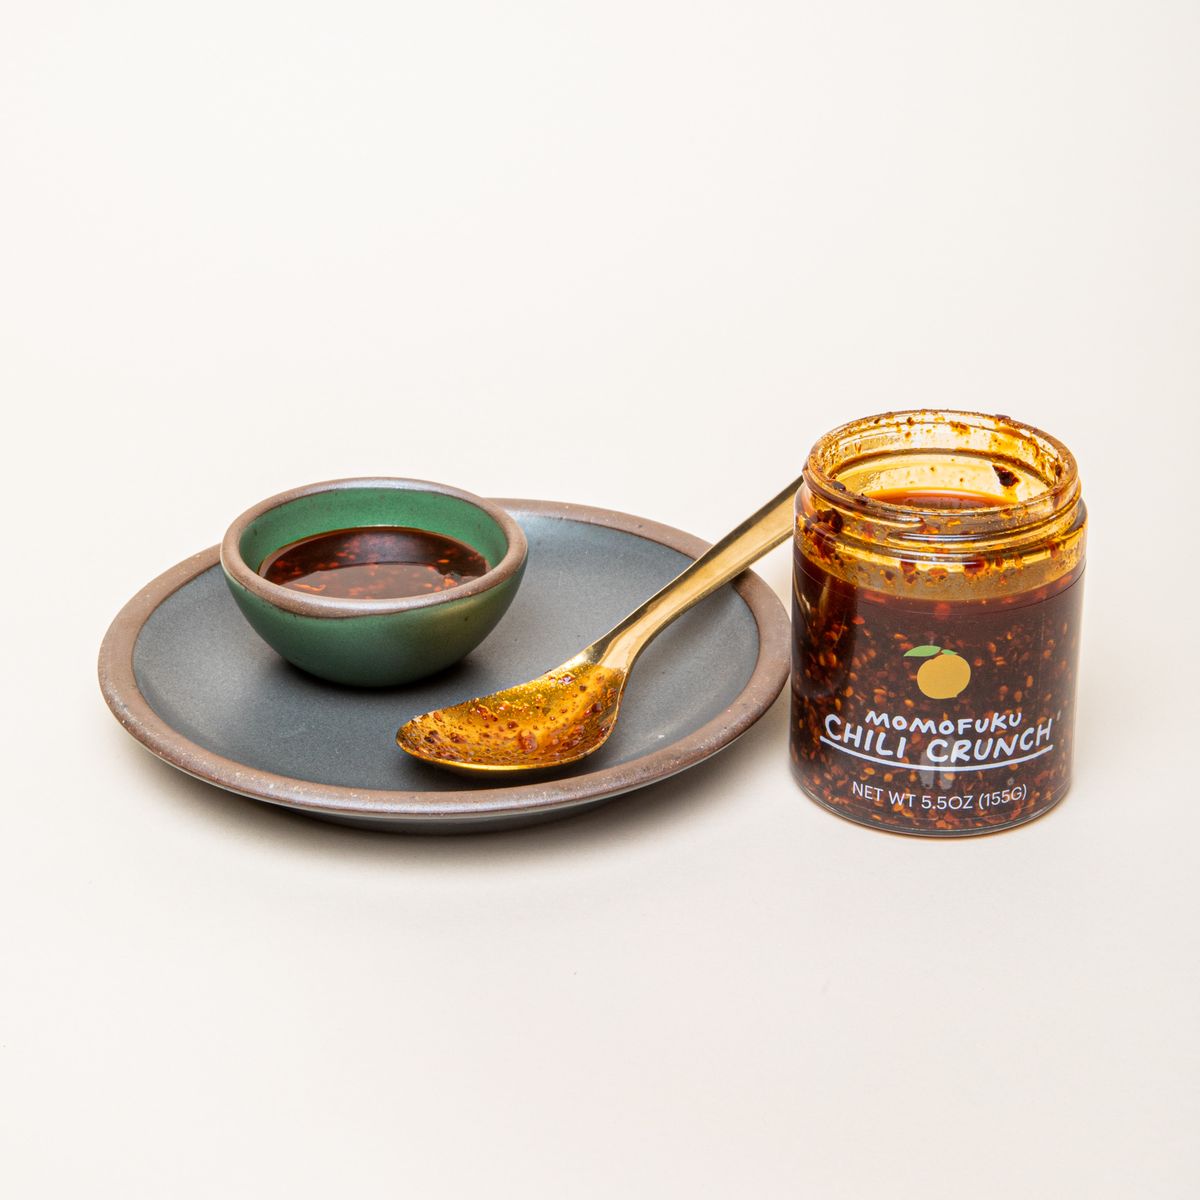 An open clear jar labeled "Momofuku Chili Crunch" filled with a warm brown sauce with chili flakes next to a plate, tiny bowl, and brass spoon